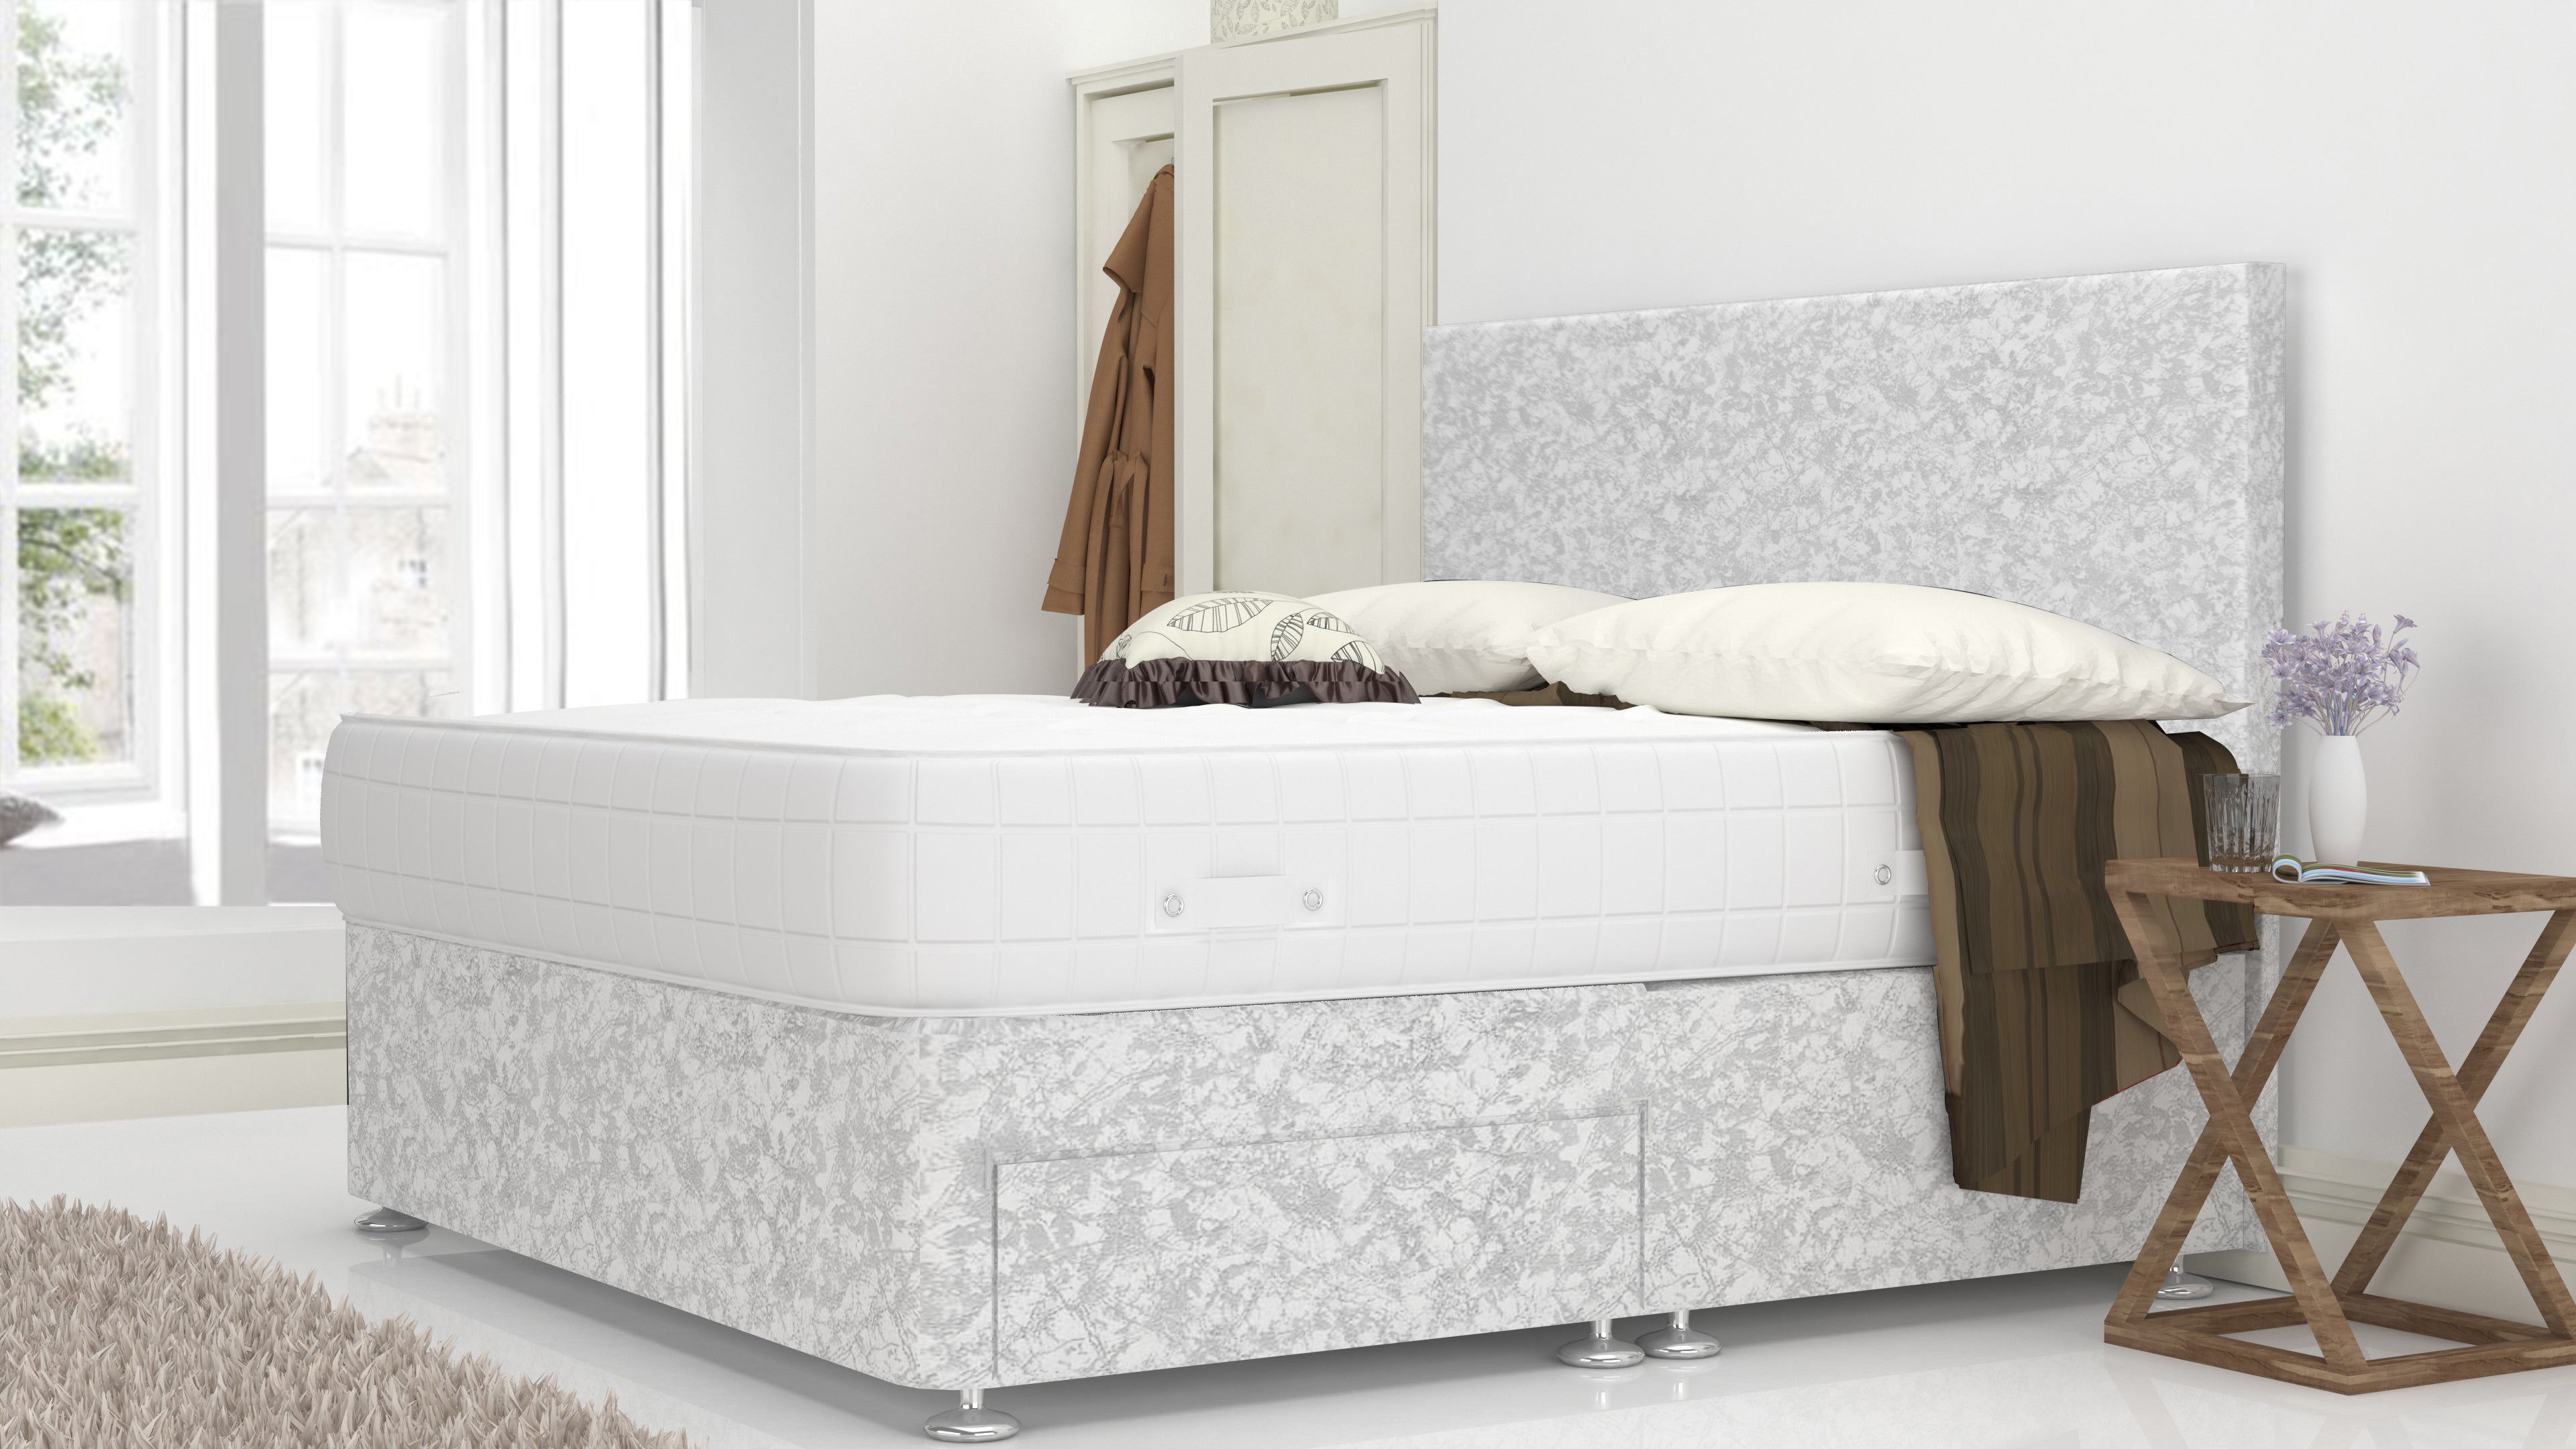 White Crushed Velvet 6 Feet Divan Bed With Plain Headboard (Included Feet) And Free Memory Foam Mattress